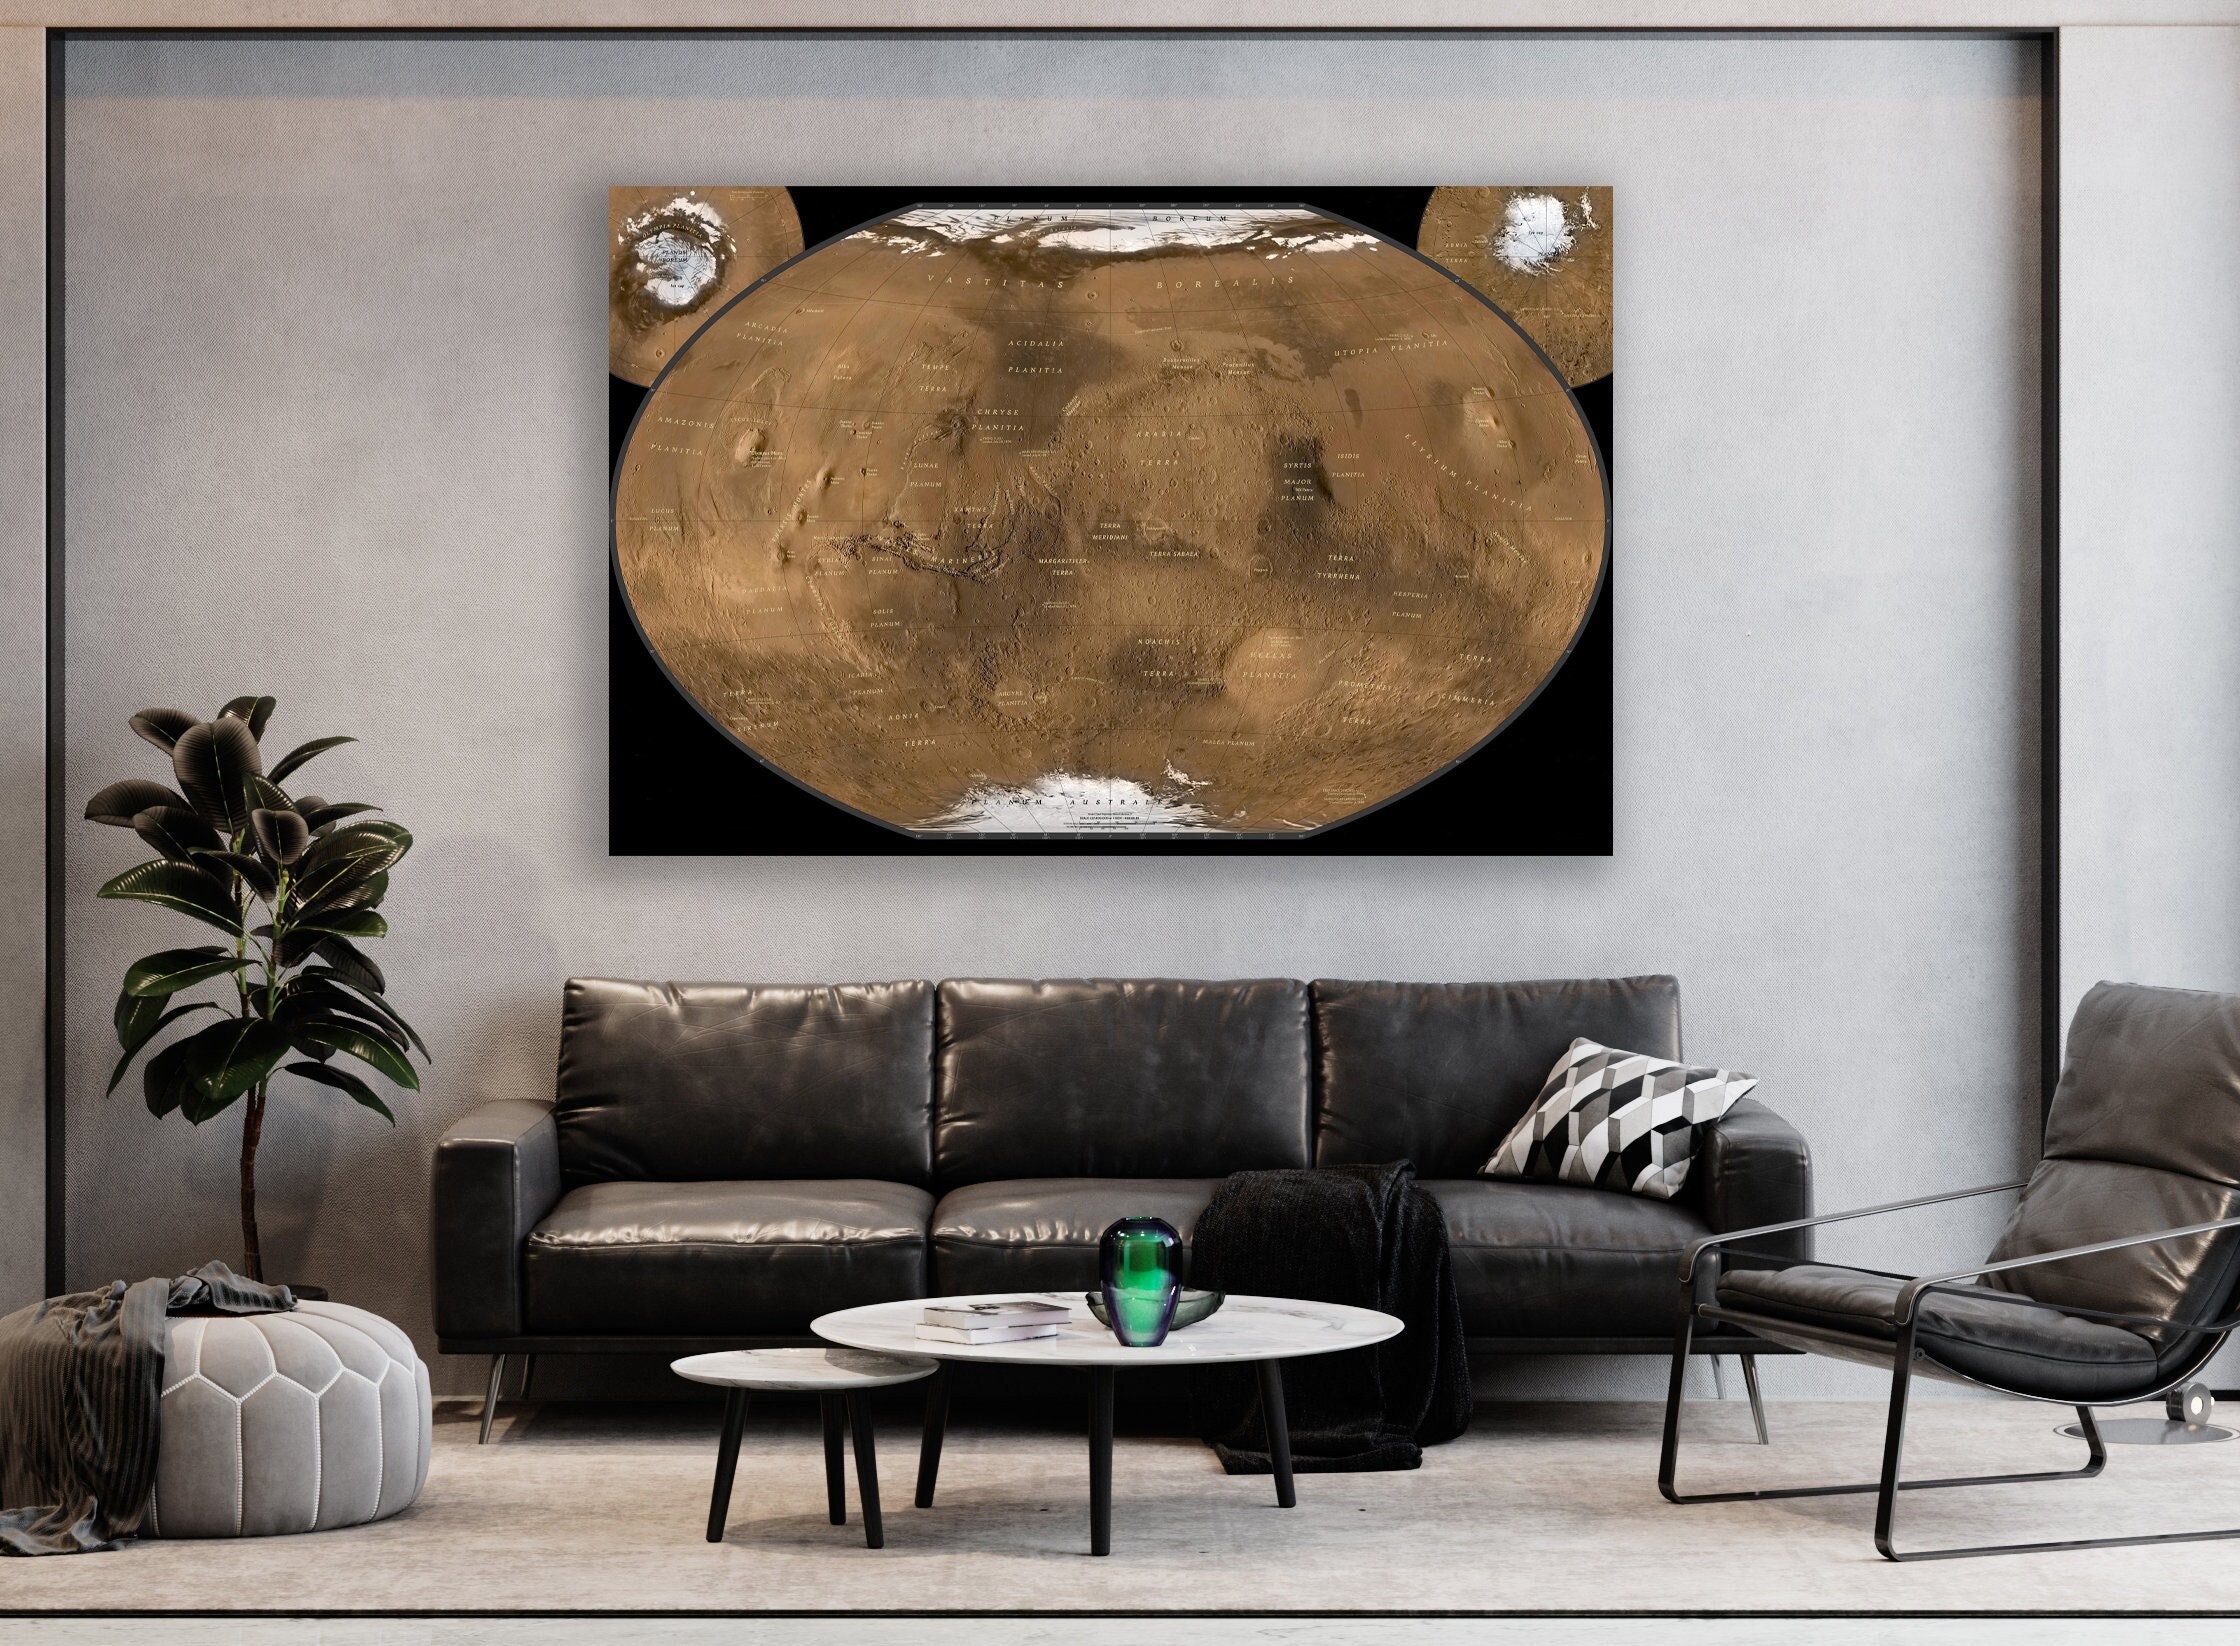 Show Me Mars Canvas Wall Decor Prints - Colorful Half Circle (styles > Abstract art) - 40x26 in